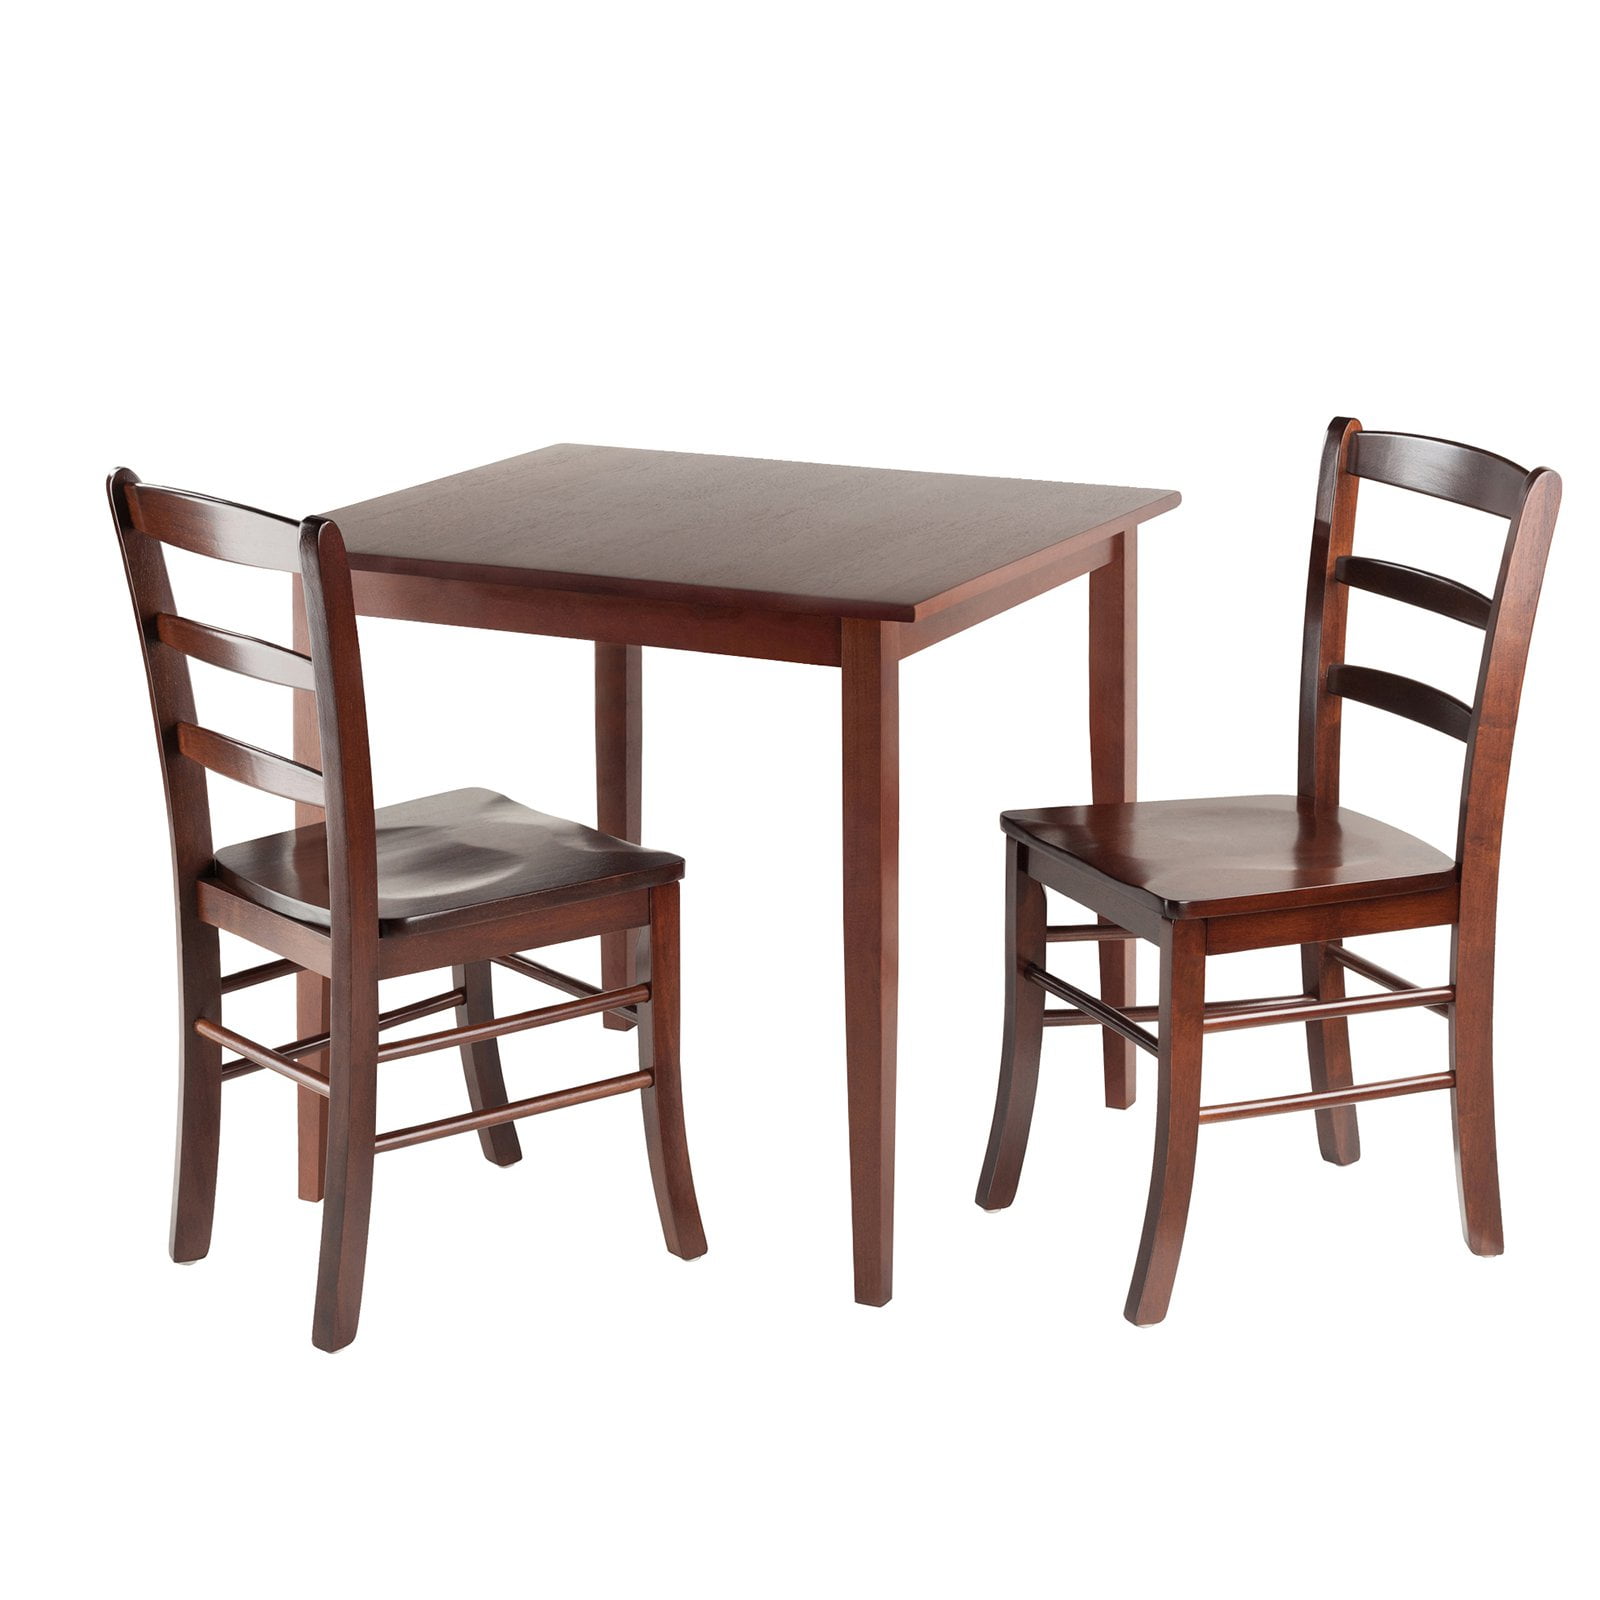 Winsome Groveland Square Dining Table With 2 Chairs